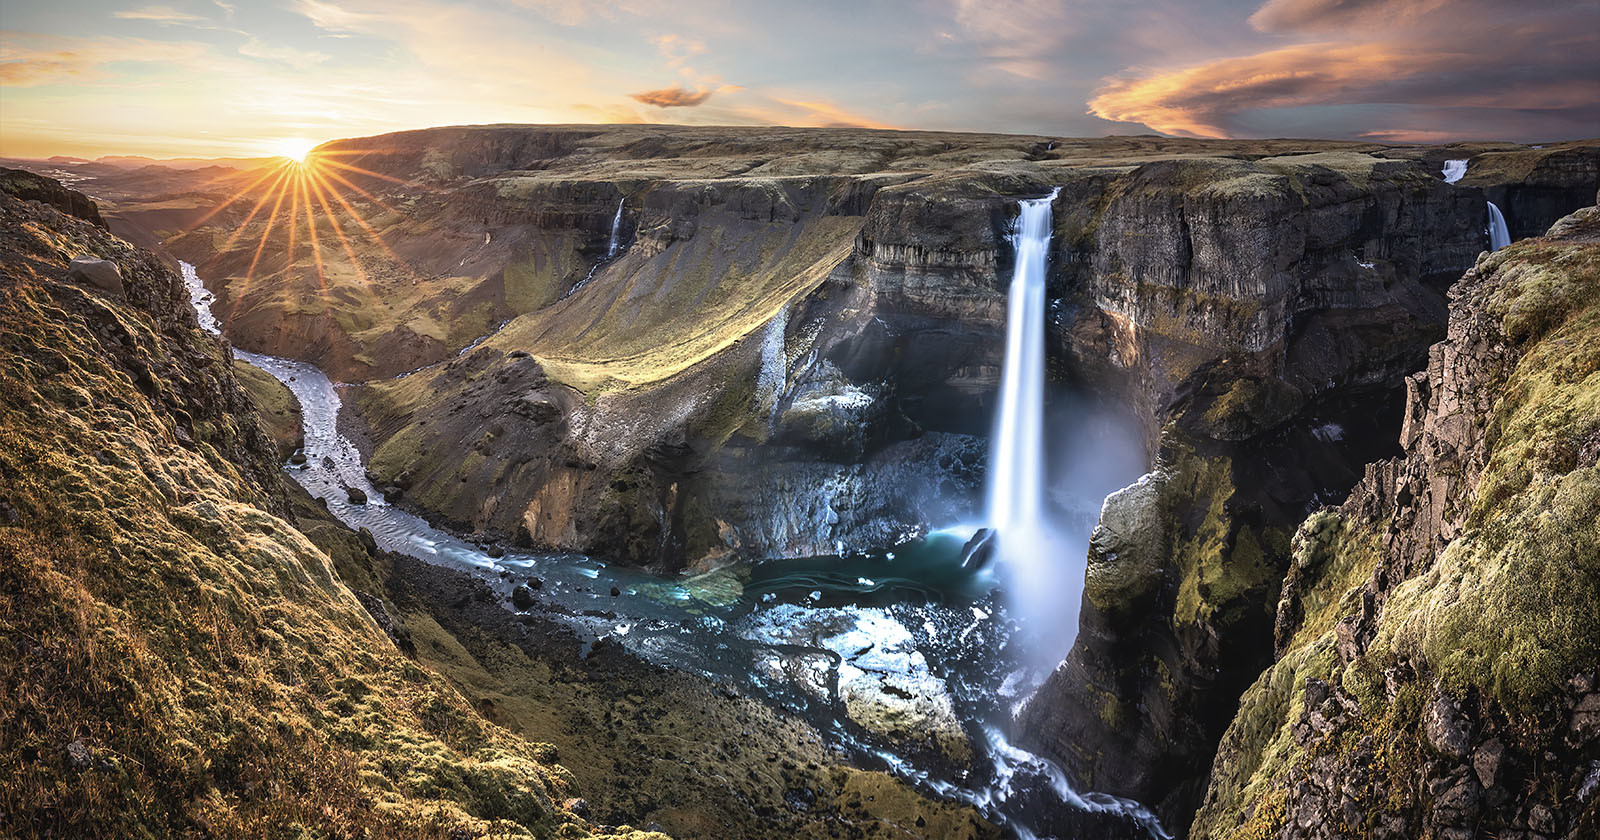 Iceland Hotel Offering 10-Day Stay in Exchange for Landscape Photos